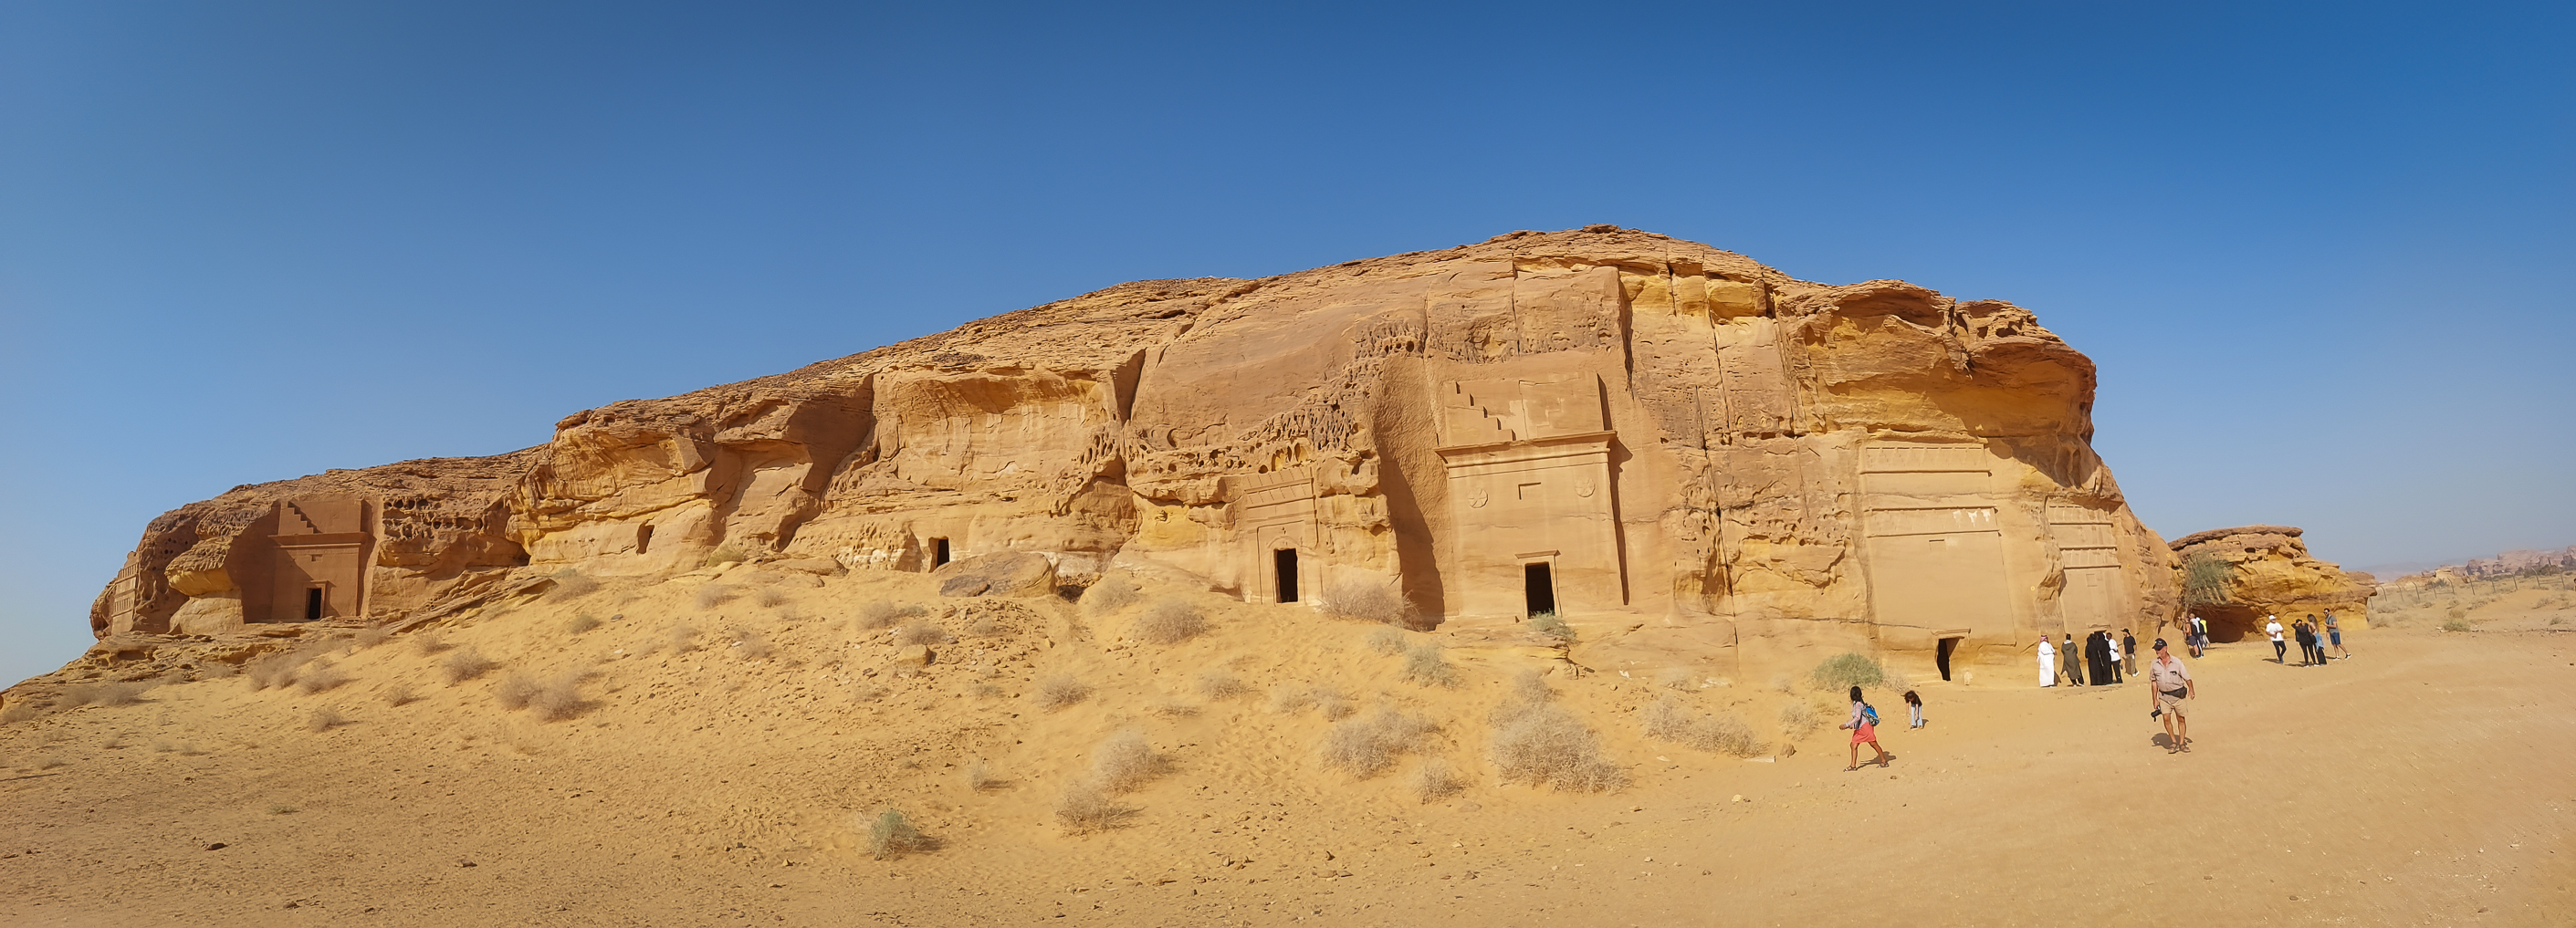 <span  class="uc_style_uc_tiles_grid_image_elementor_uc_items_attribute_title" style="color:#ffffff;">rock tombs in Al Ula (they call it 'Petra of Saudi Arabia')</span>